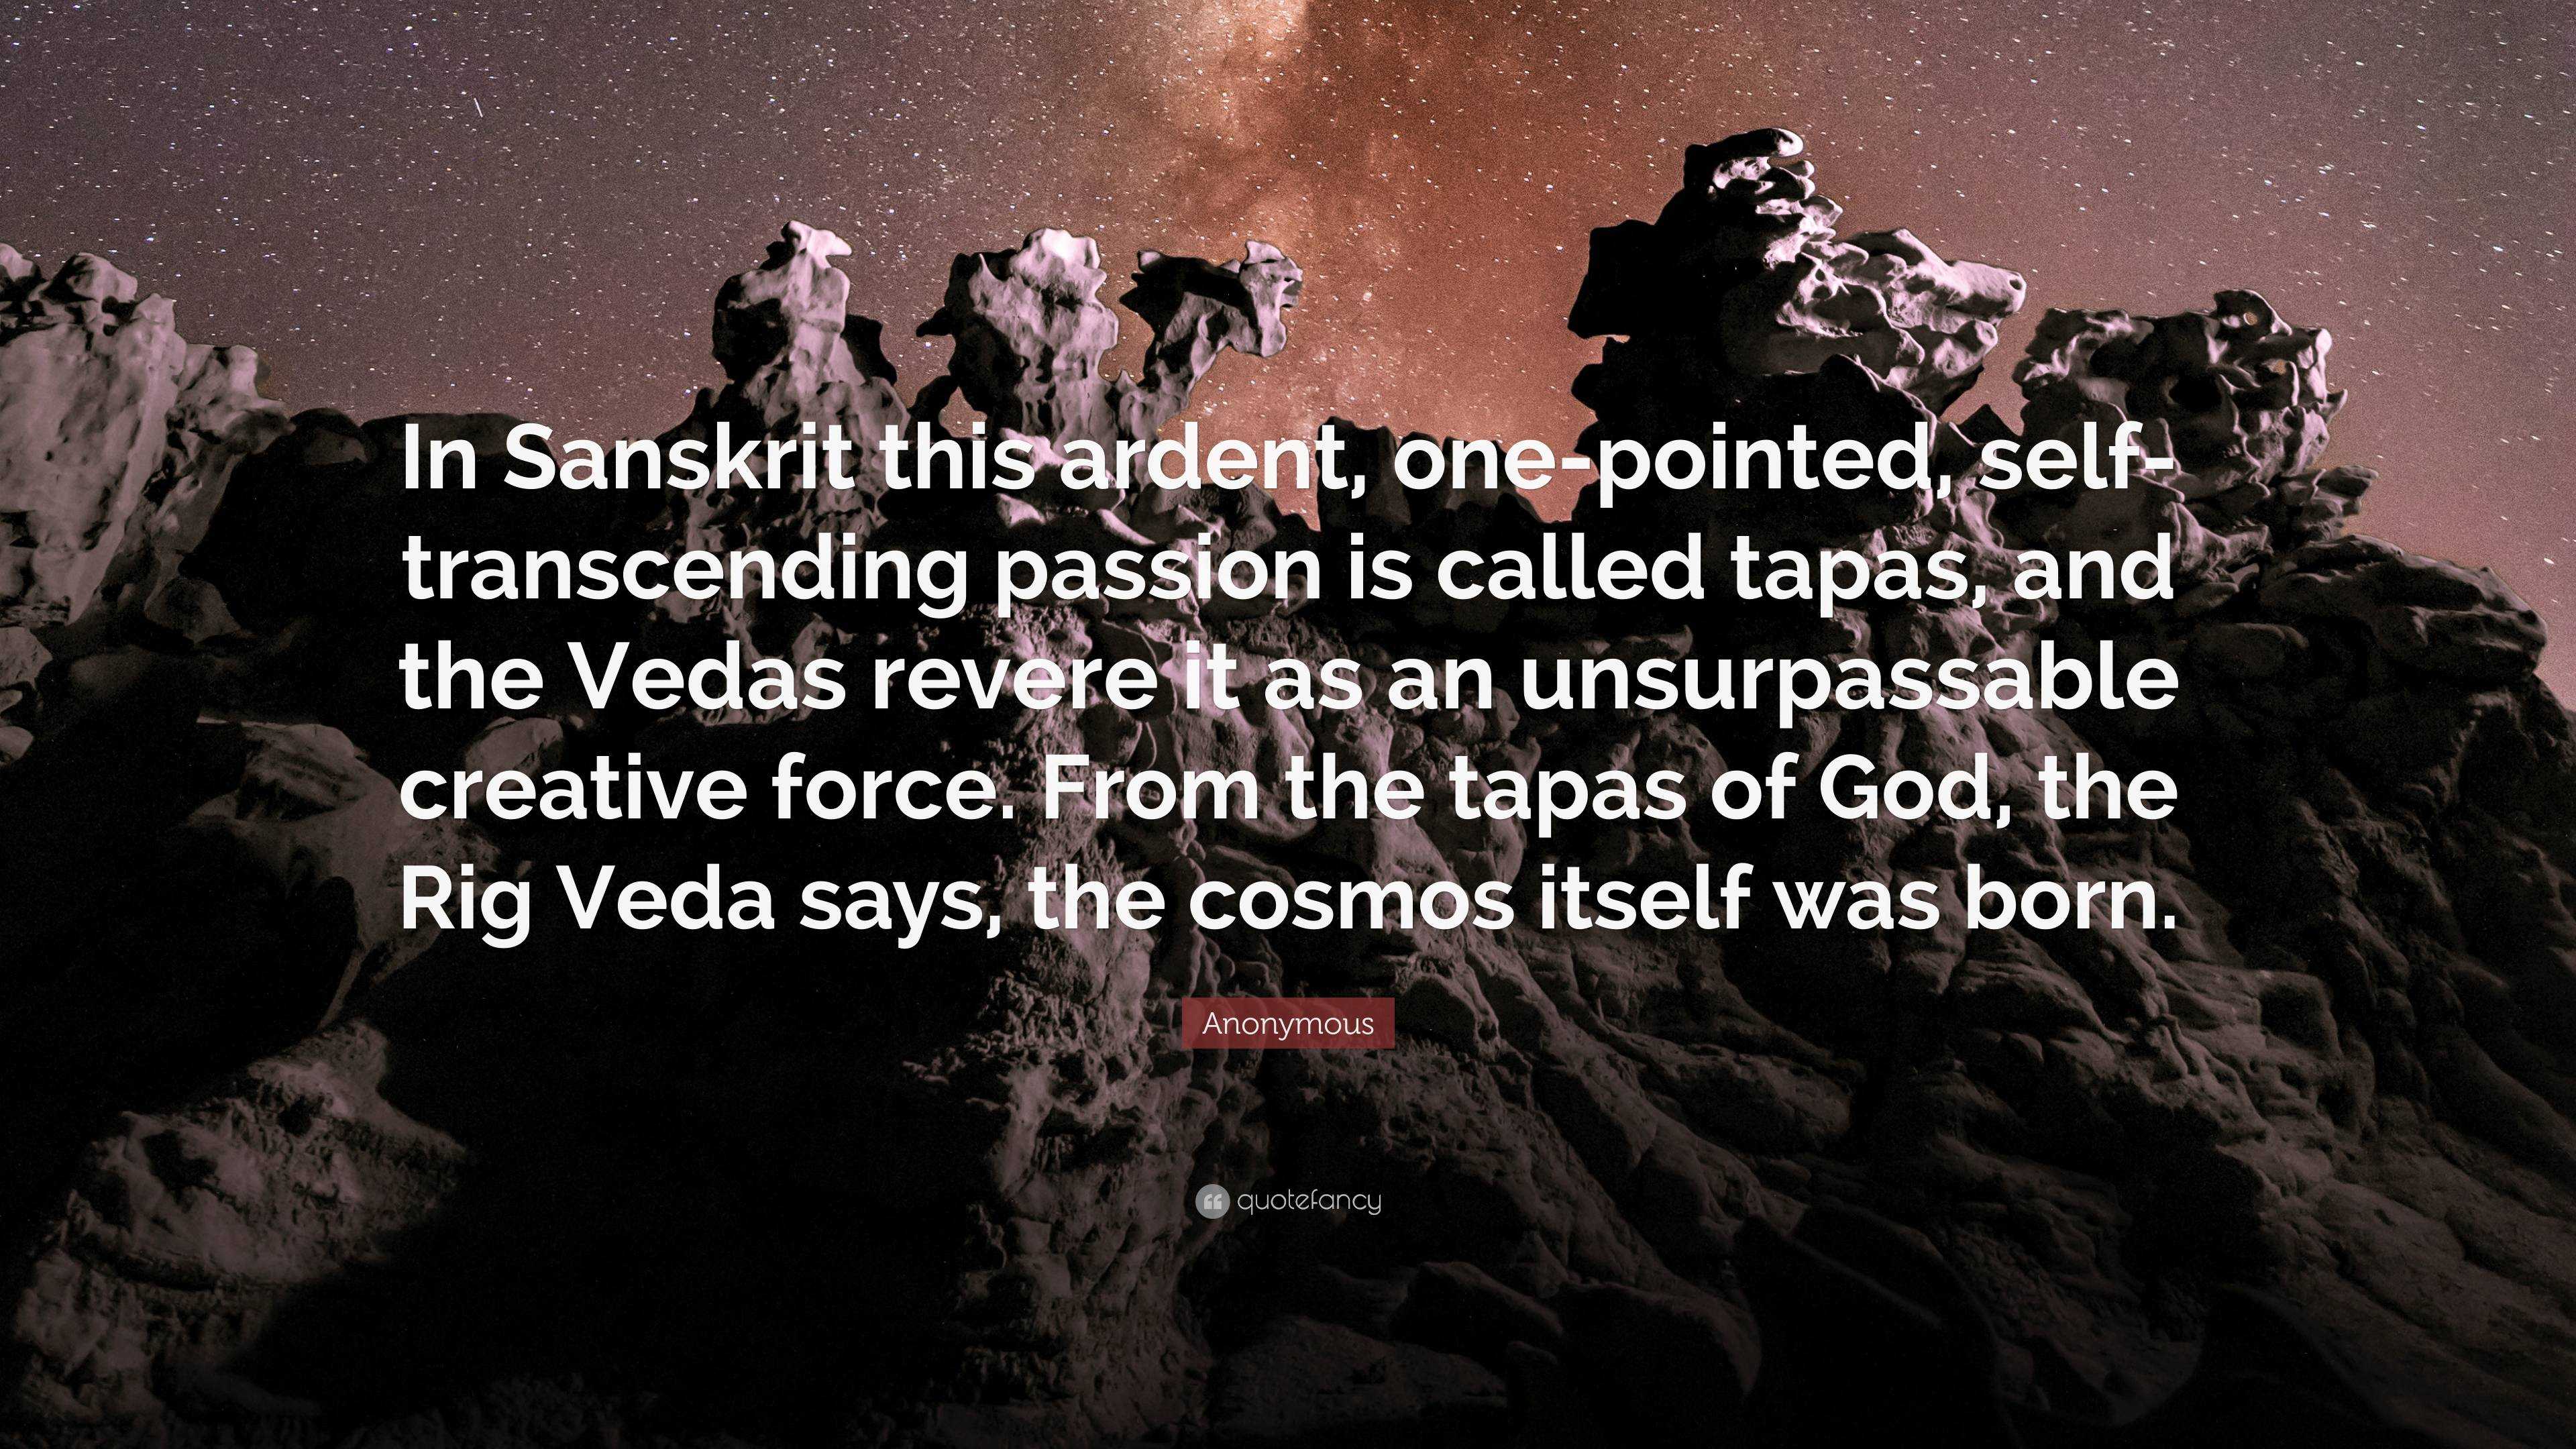 Anonymous Quote: “In Sanskrit this ardent, one-pointed, self-transcending  passion is called tapas, and the Vedas revere it as an unsurpass...”